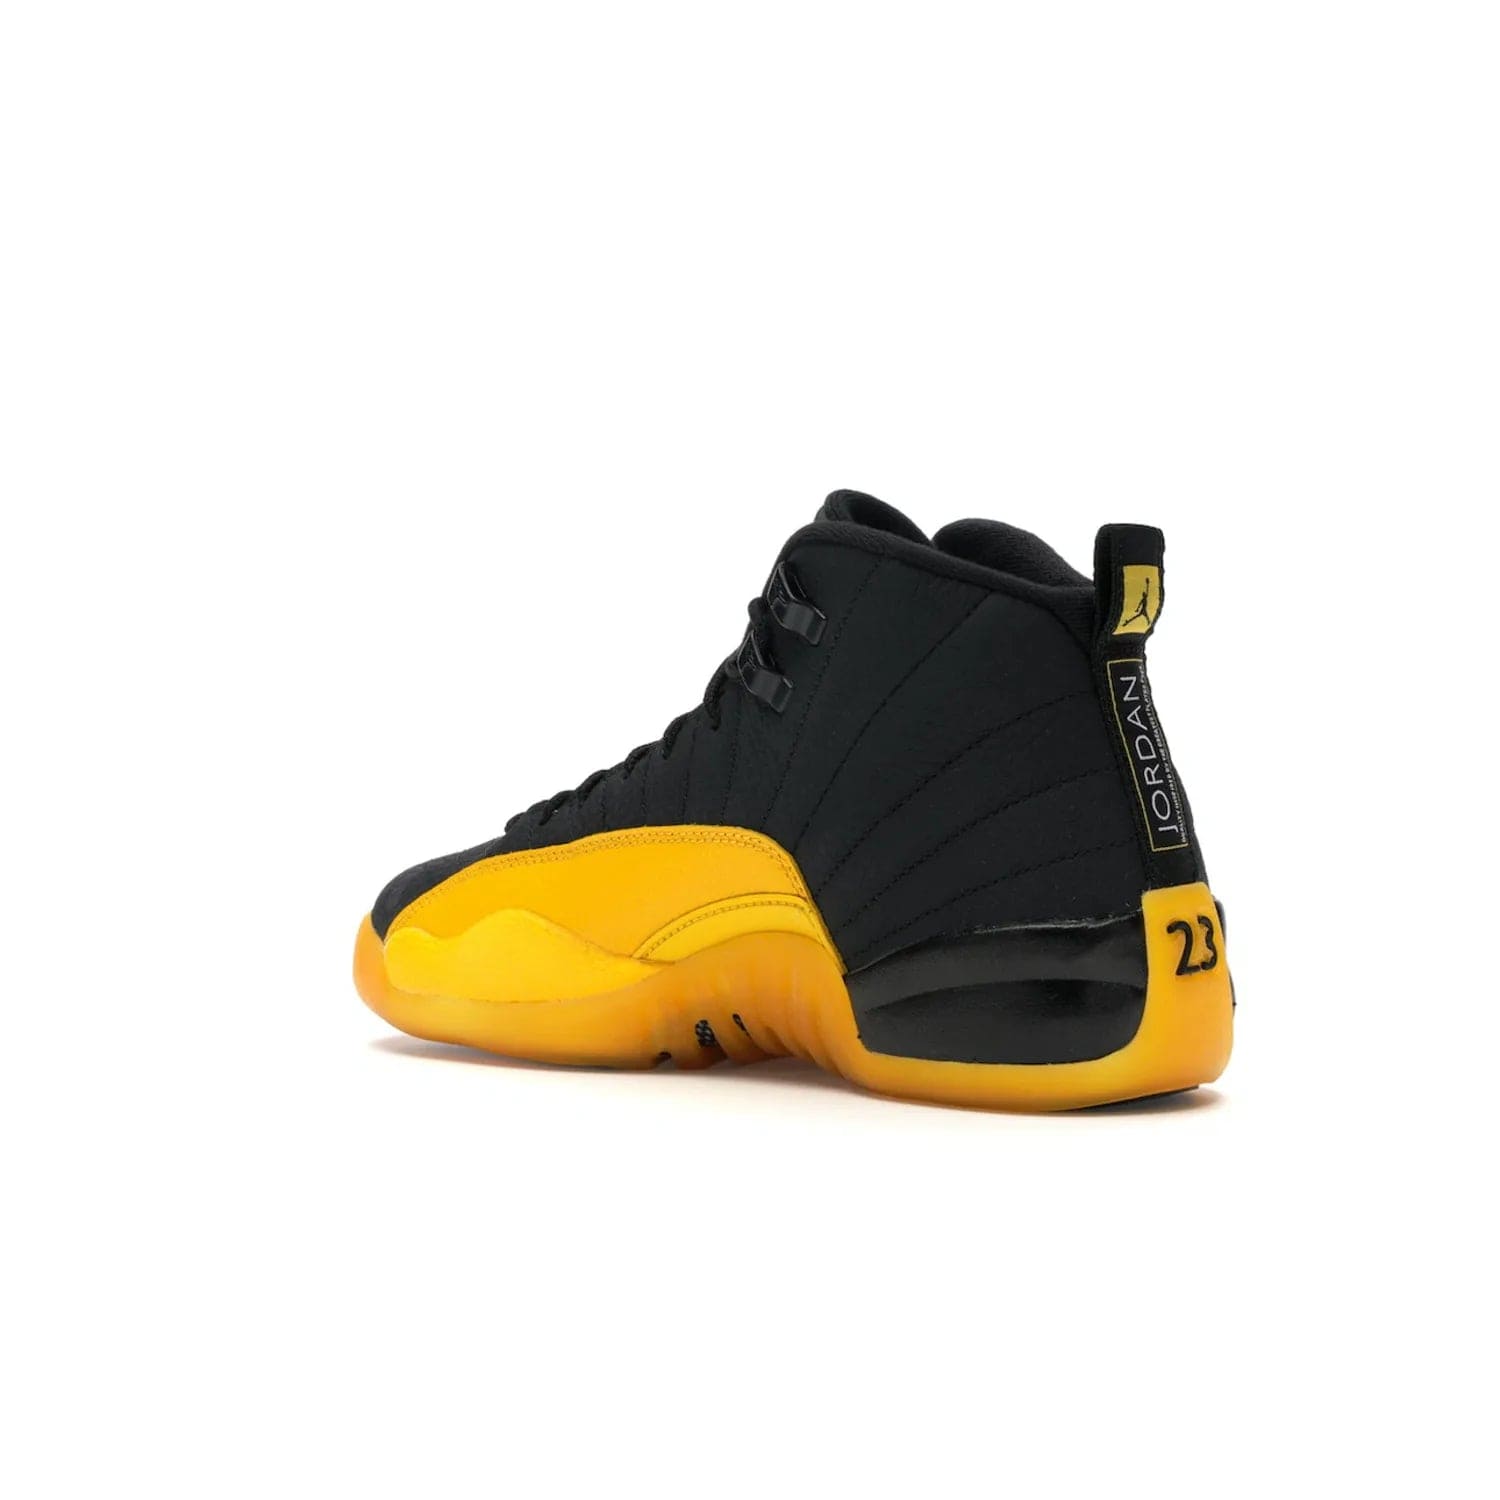 Jordan 12 Retro Black University Gold (GS) - Image 23 - Only at www.BallersClubKickz.com - Upgrade your kid's shoe collection with the Jordan 12 Retro Black University Gold. With classic style, black tumbled leather upper, and University Gold accents, it's a great summer look. Out July 2020.